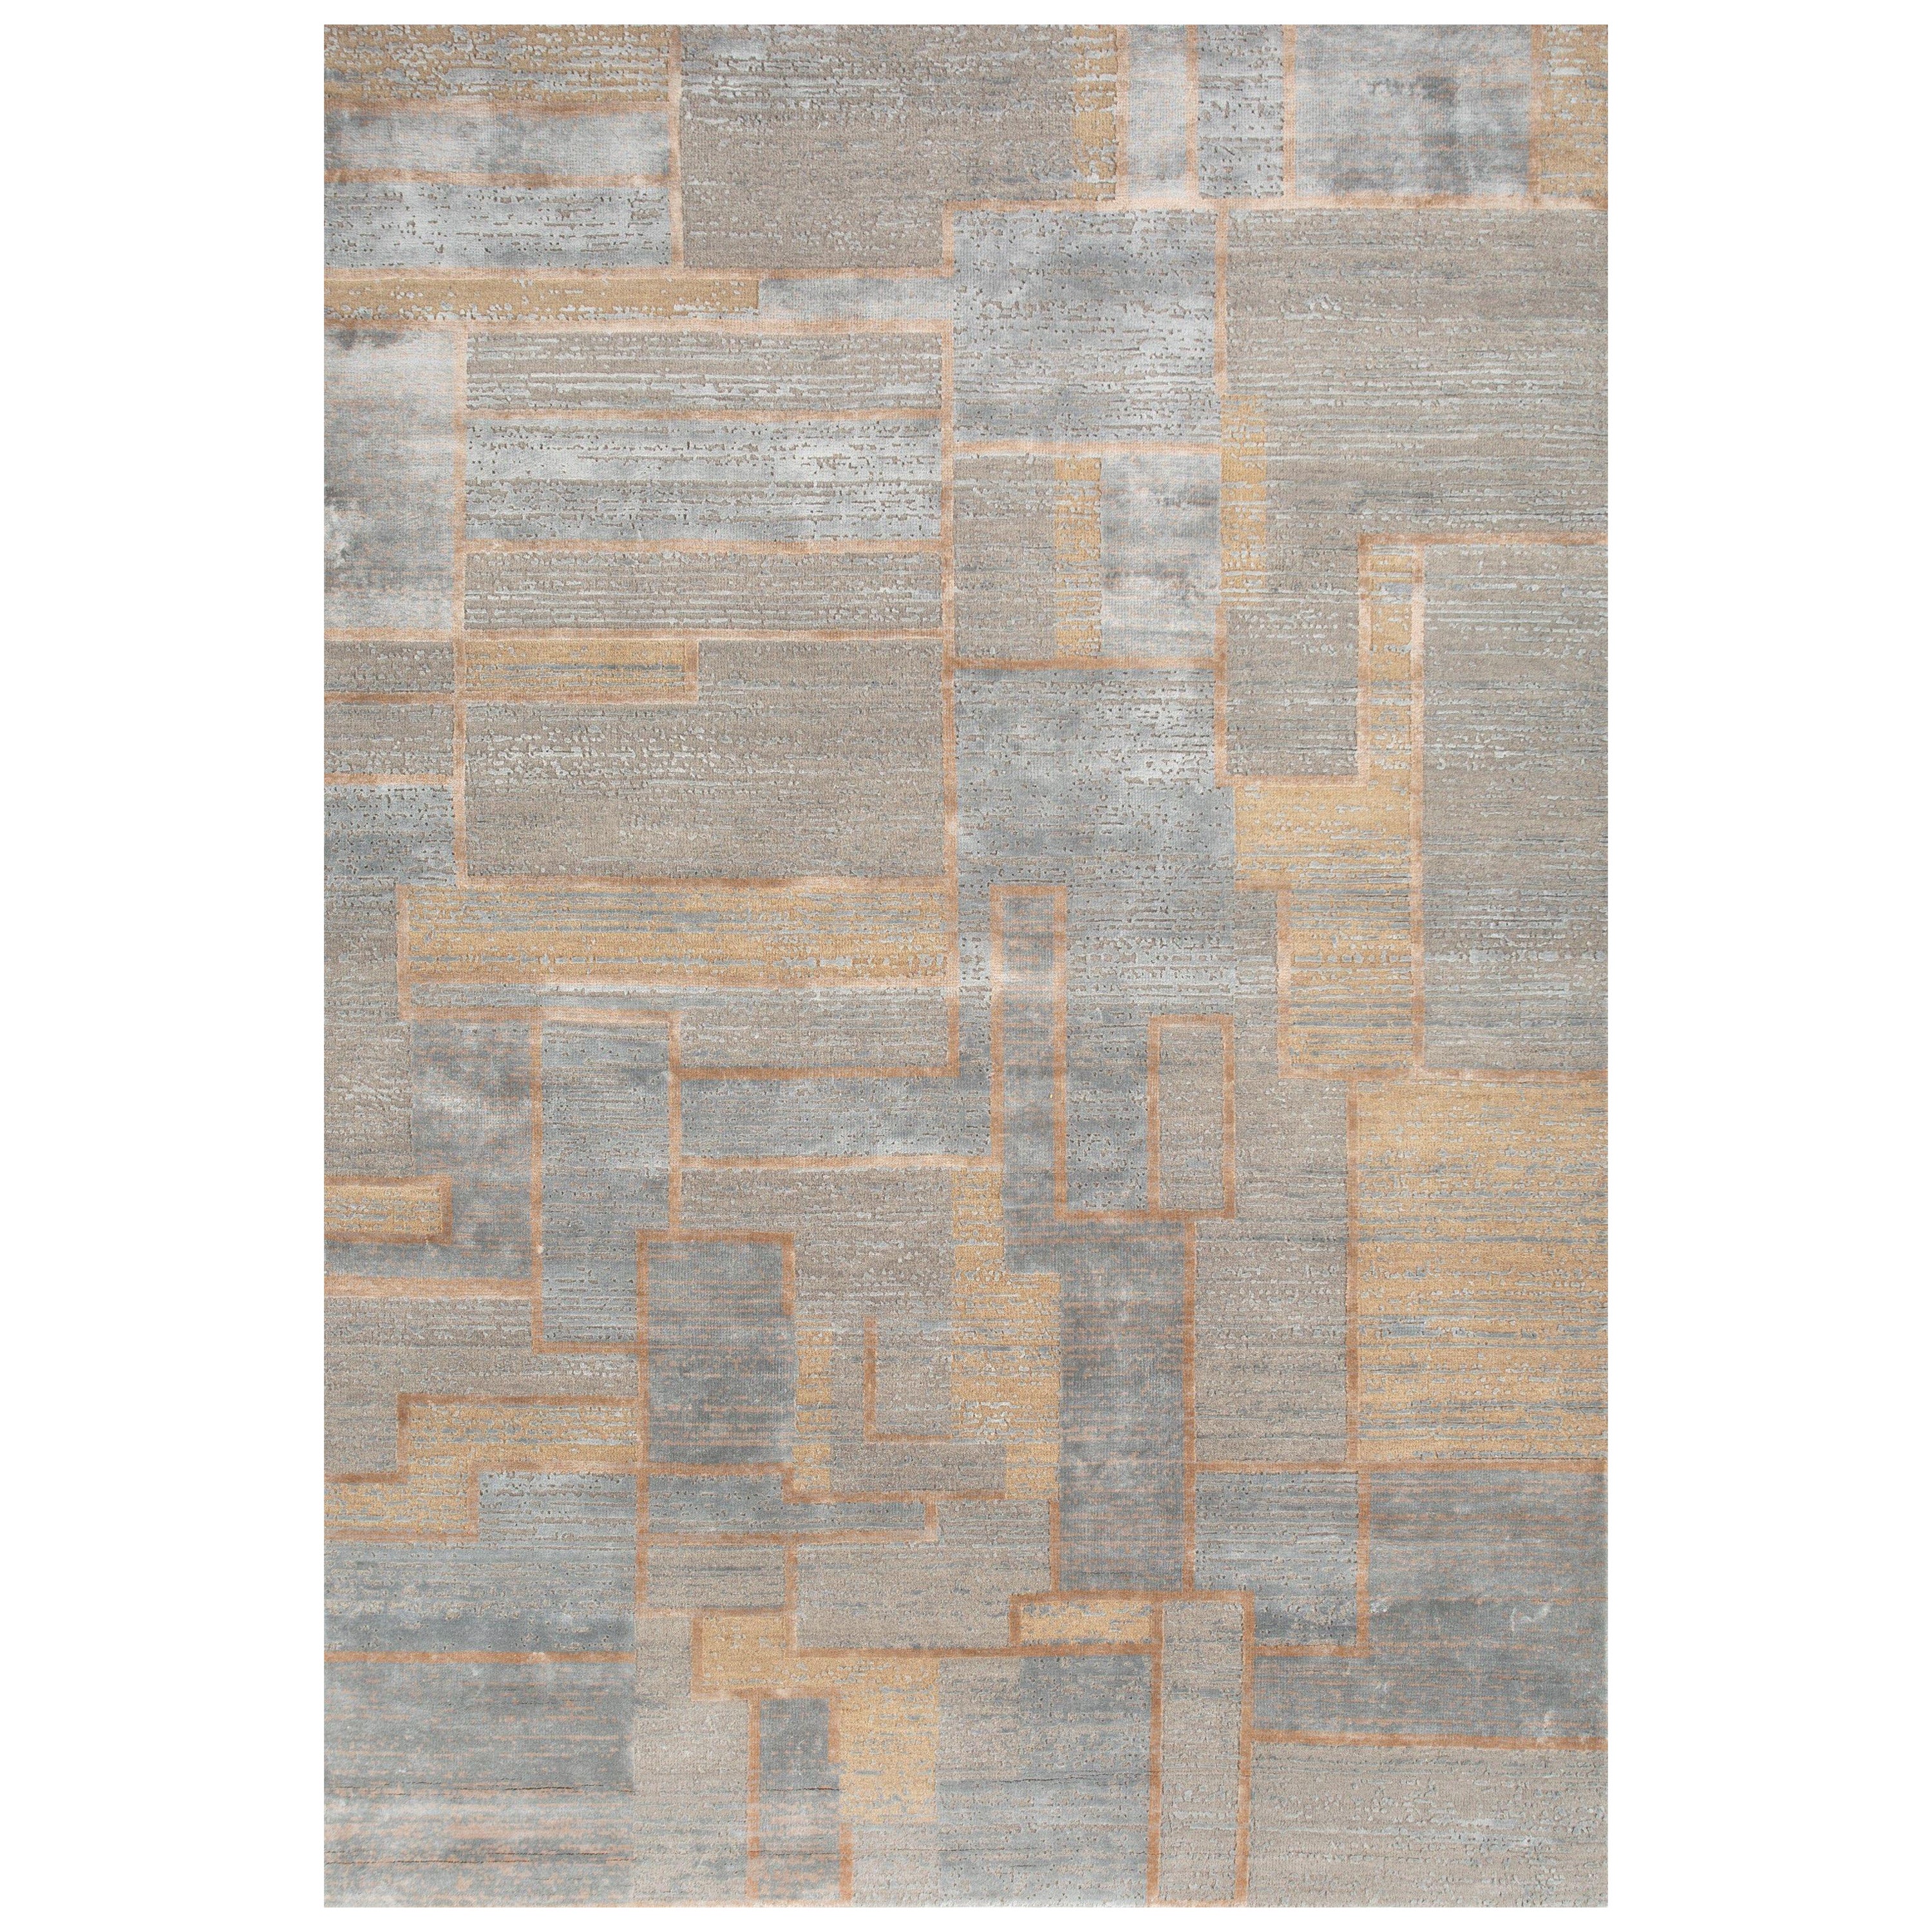 Serendipitious Fusion Ashwood & Iced Slate 200X300 cm Handknotted Rug For Sale